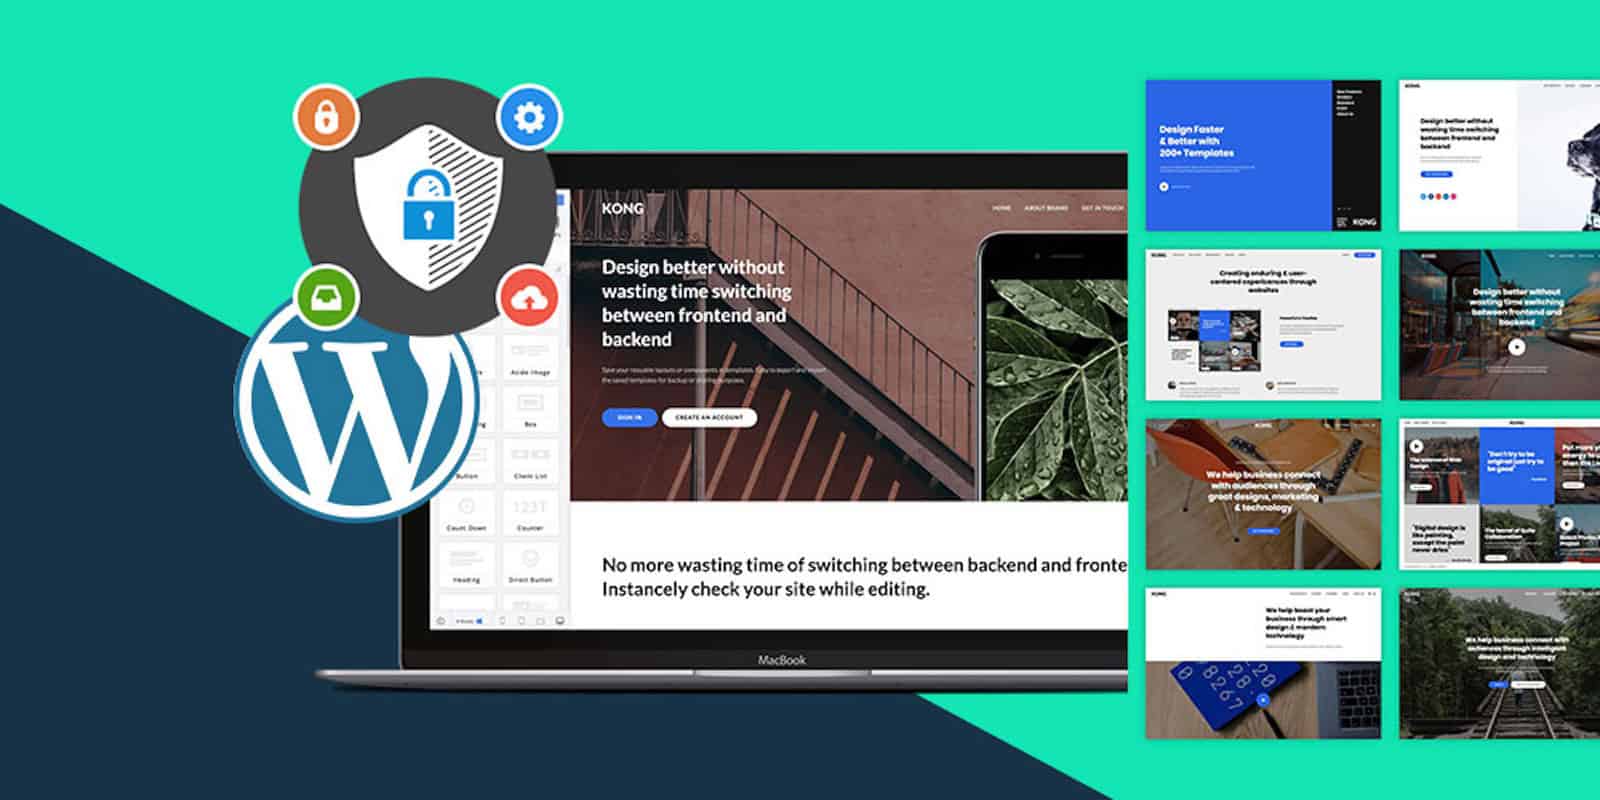 Get the tools you need to build and protect the WordPress site of your dreams.